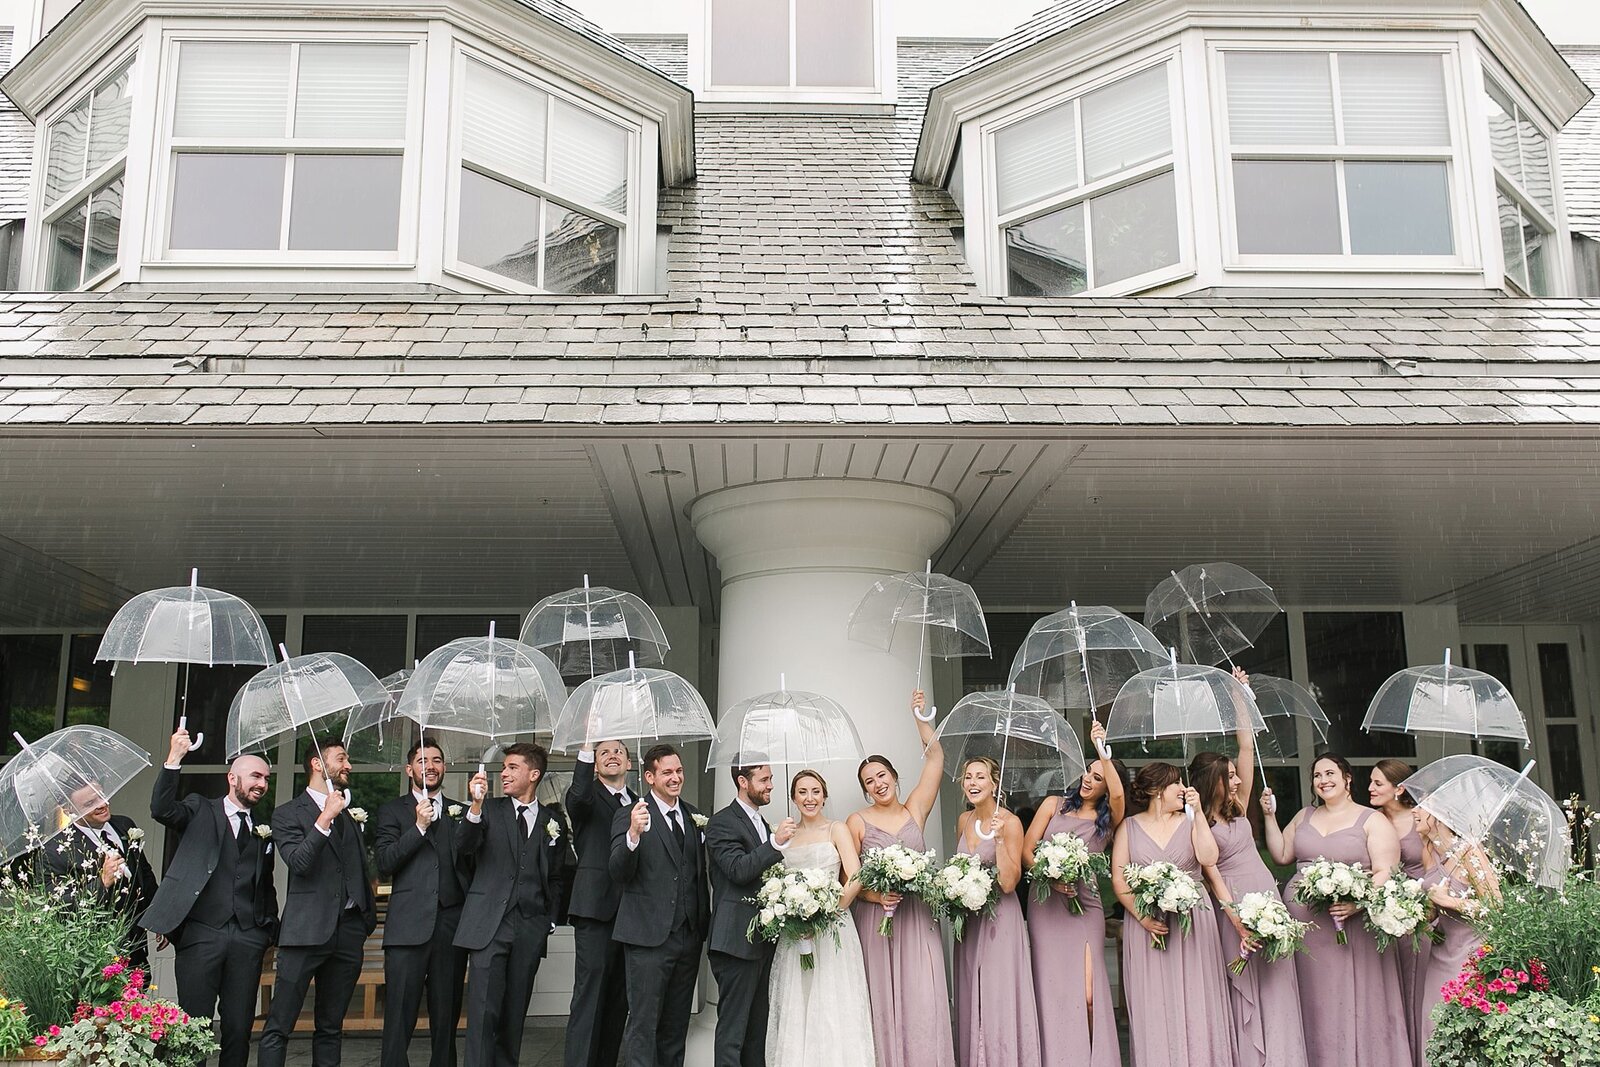 Wedding party hold up clear umbrellas on rainy wedding day in State College, PA by the Jepsons.